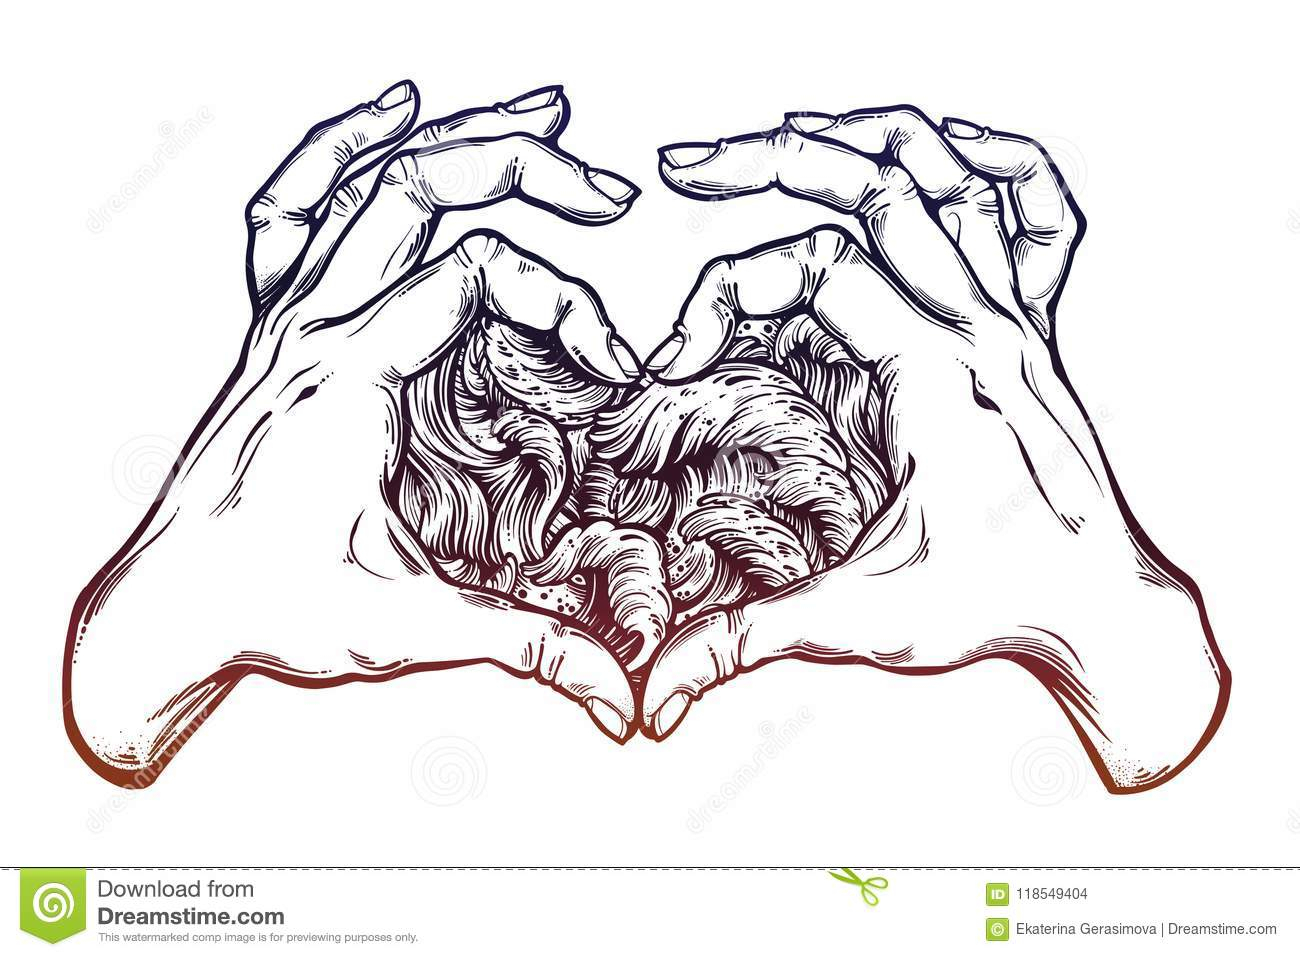 Two Hands Making Heart Sign With Drawn Water Waves In The avec Dessin 2 Mains